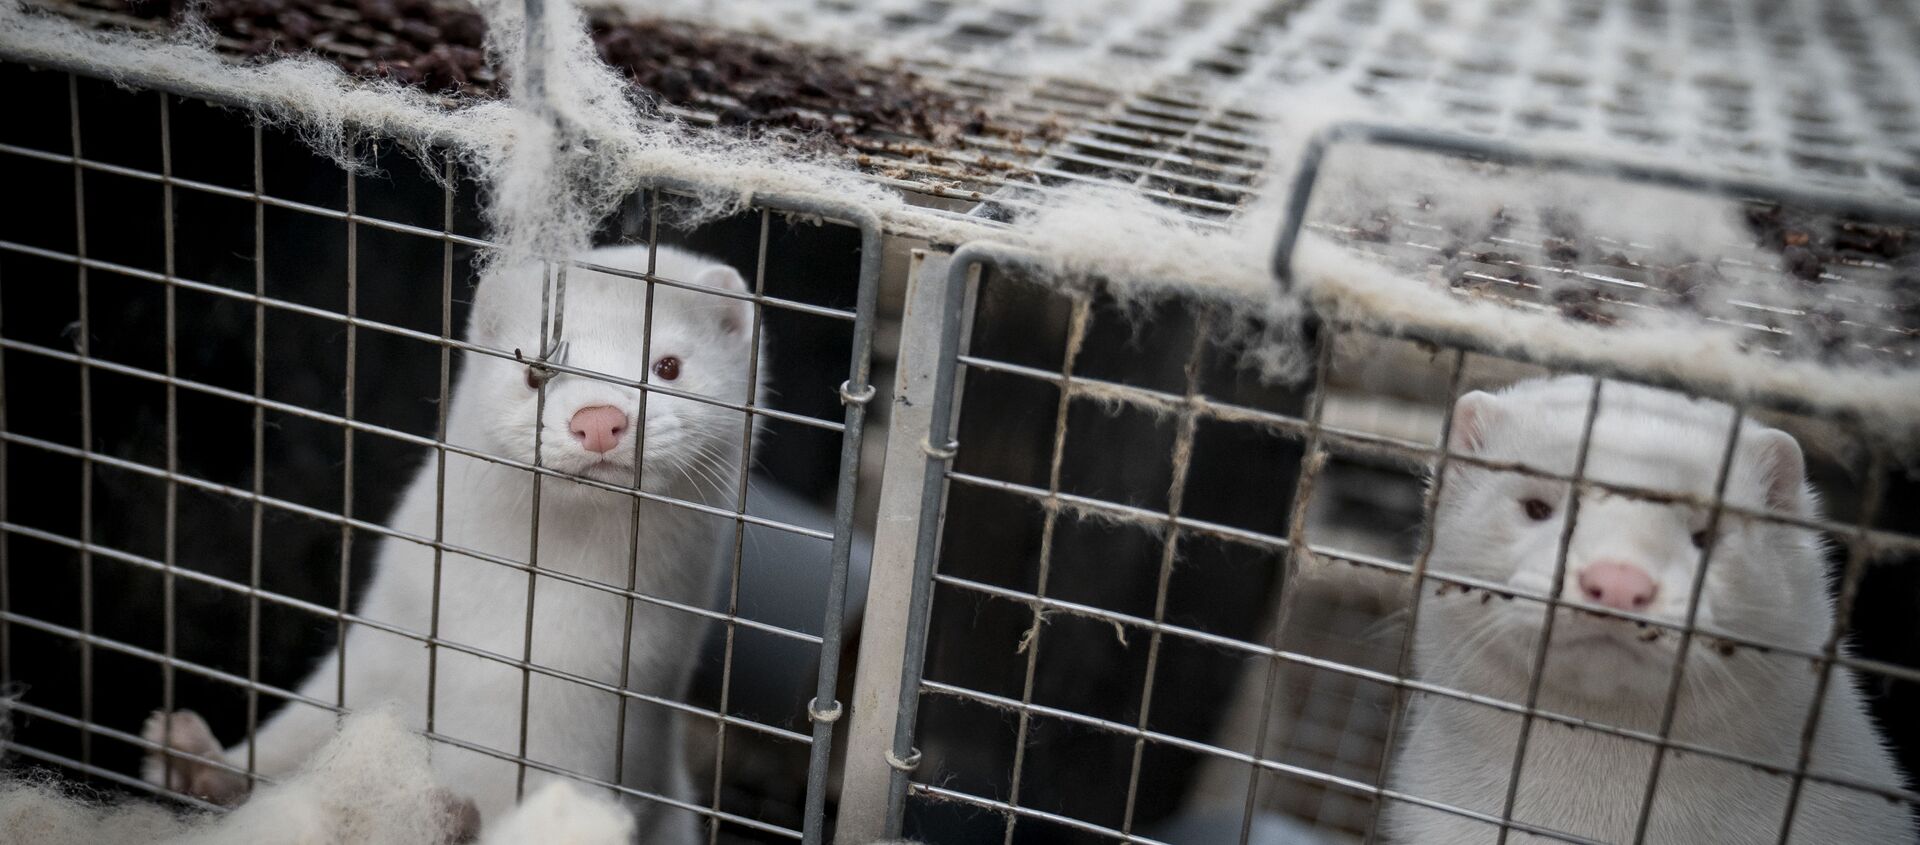 This file photo taken on November 6, 2020 shows mink looking out from their cage at the farm of Henrik Nordgaard Hansen and Ann-Mona Kulsoe Larsen as they have to kill off their herd, which consists of 3000 mother mink and their cubs on their farm near Naestved, Denmark. - A mutated version of the new coronavirus detected in Danish minks that raised concerns about the effectiveness of a future vaccine has likely been eradicated, Denmark's health ministry said Thursday, November 19, 2020. - Sputnik International, 1920, 25.11.2020